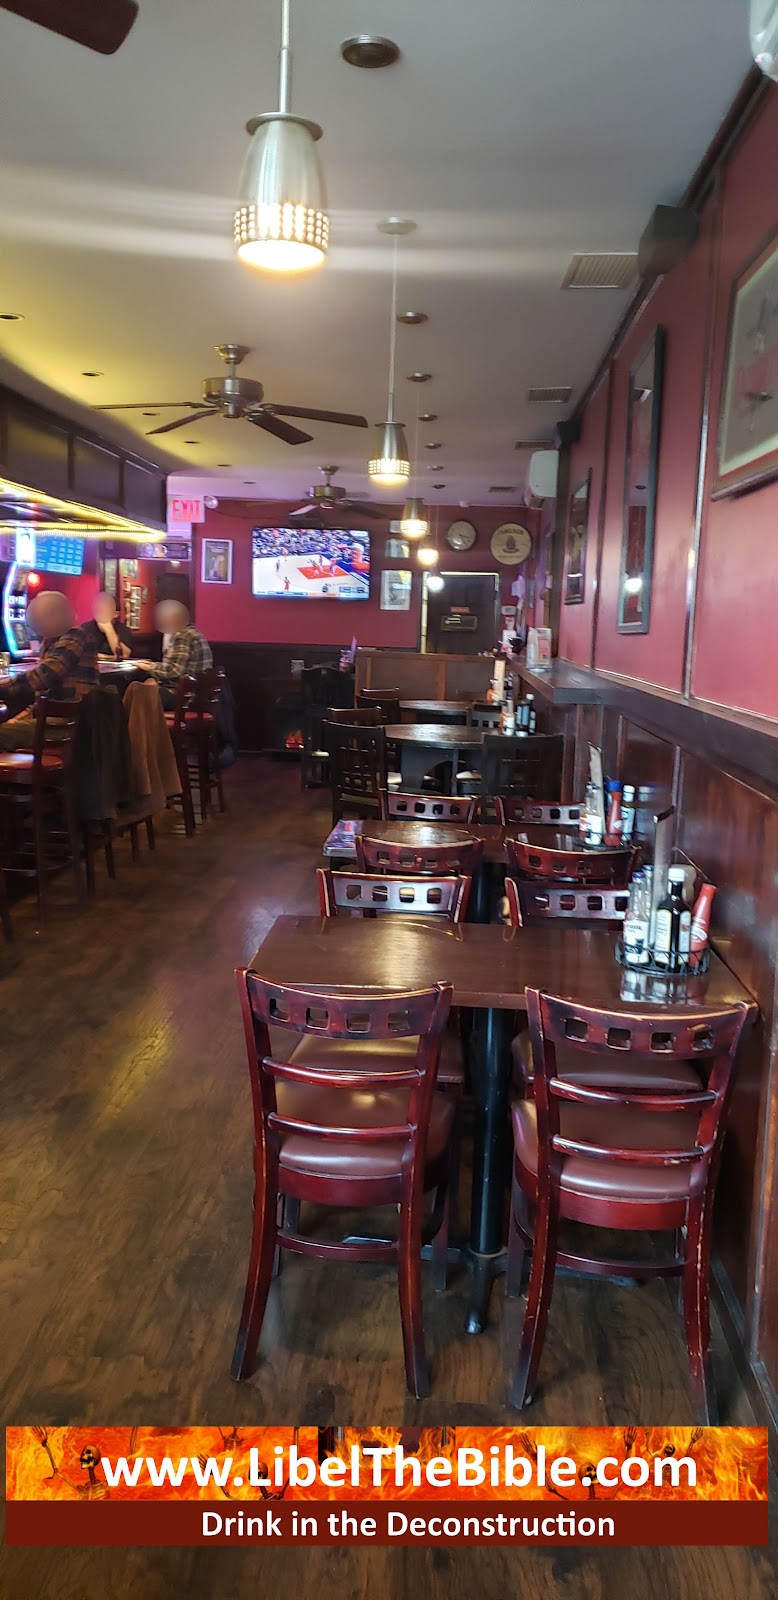 RYANS BAR & GRILL | 224 07 Union Tpke, Queens, NY 11364 | Phone: (718) 465-9040